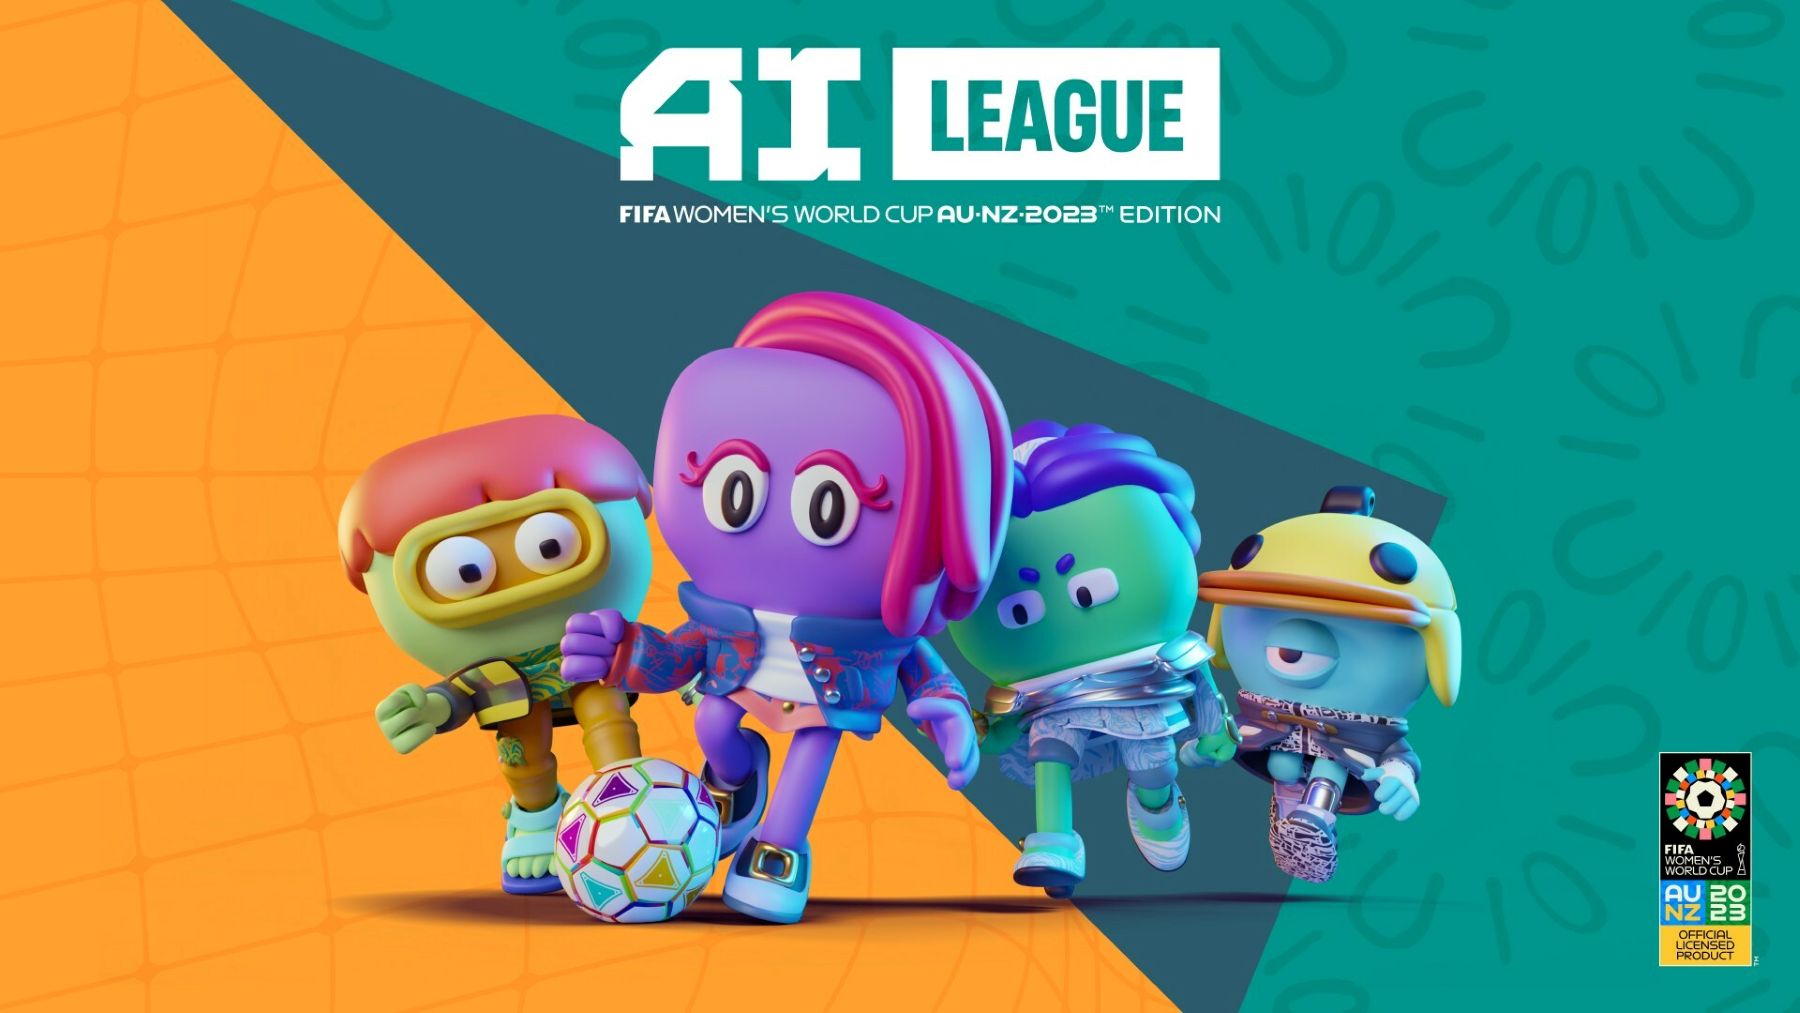 AI LEAGUE MOBILE GAME ARRIVES ON IOS IN TIME FOR FIFA WOMEN’S WORLD CUP 2023™